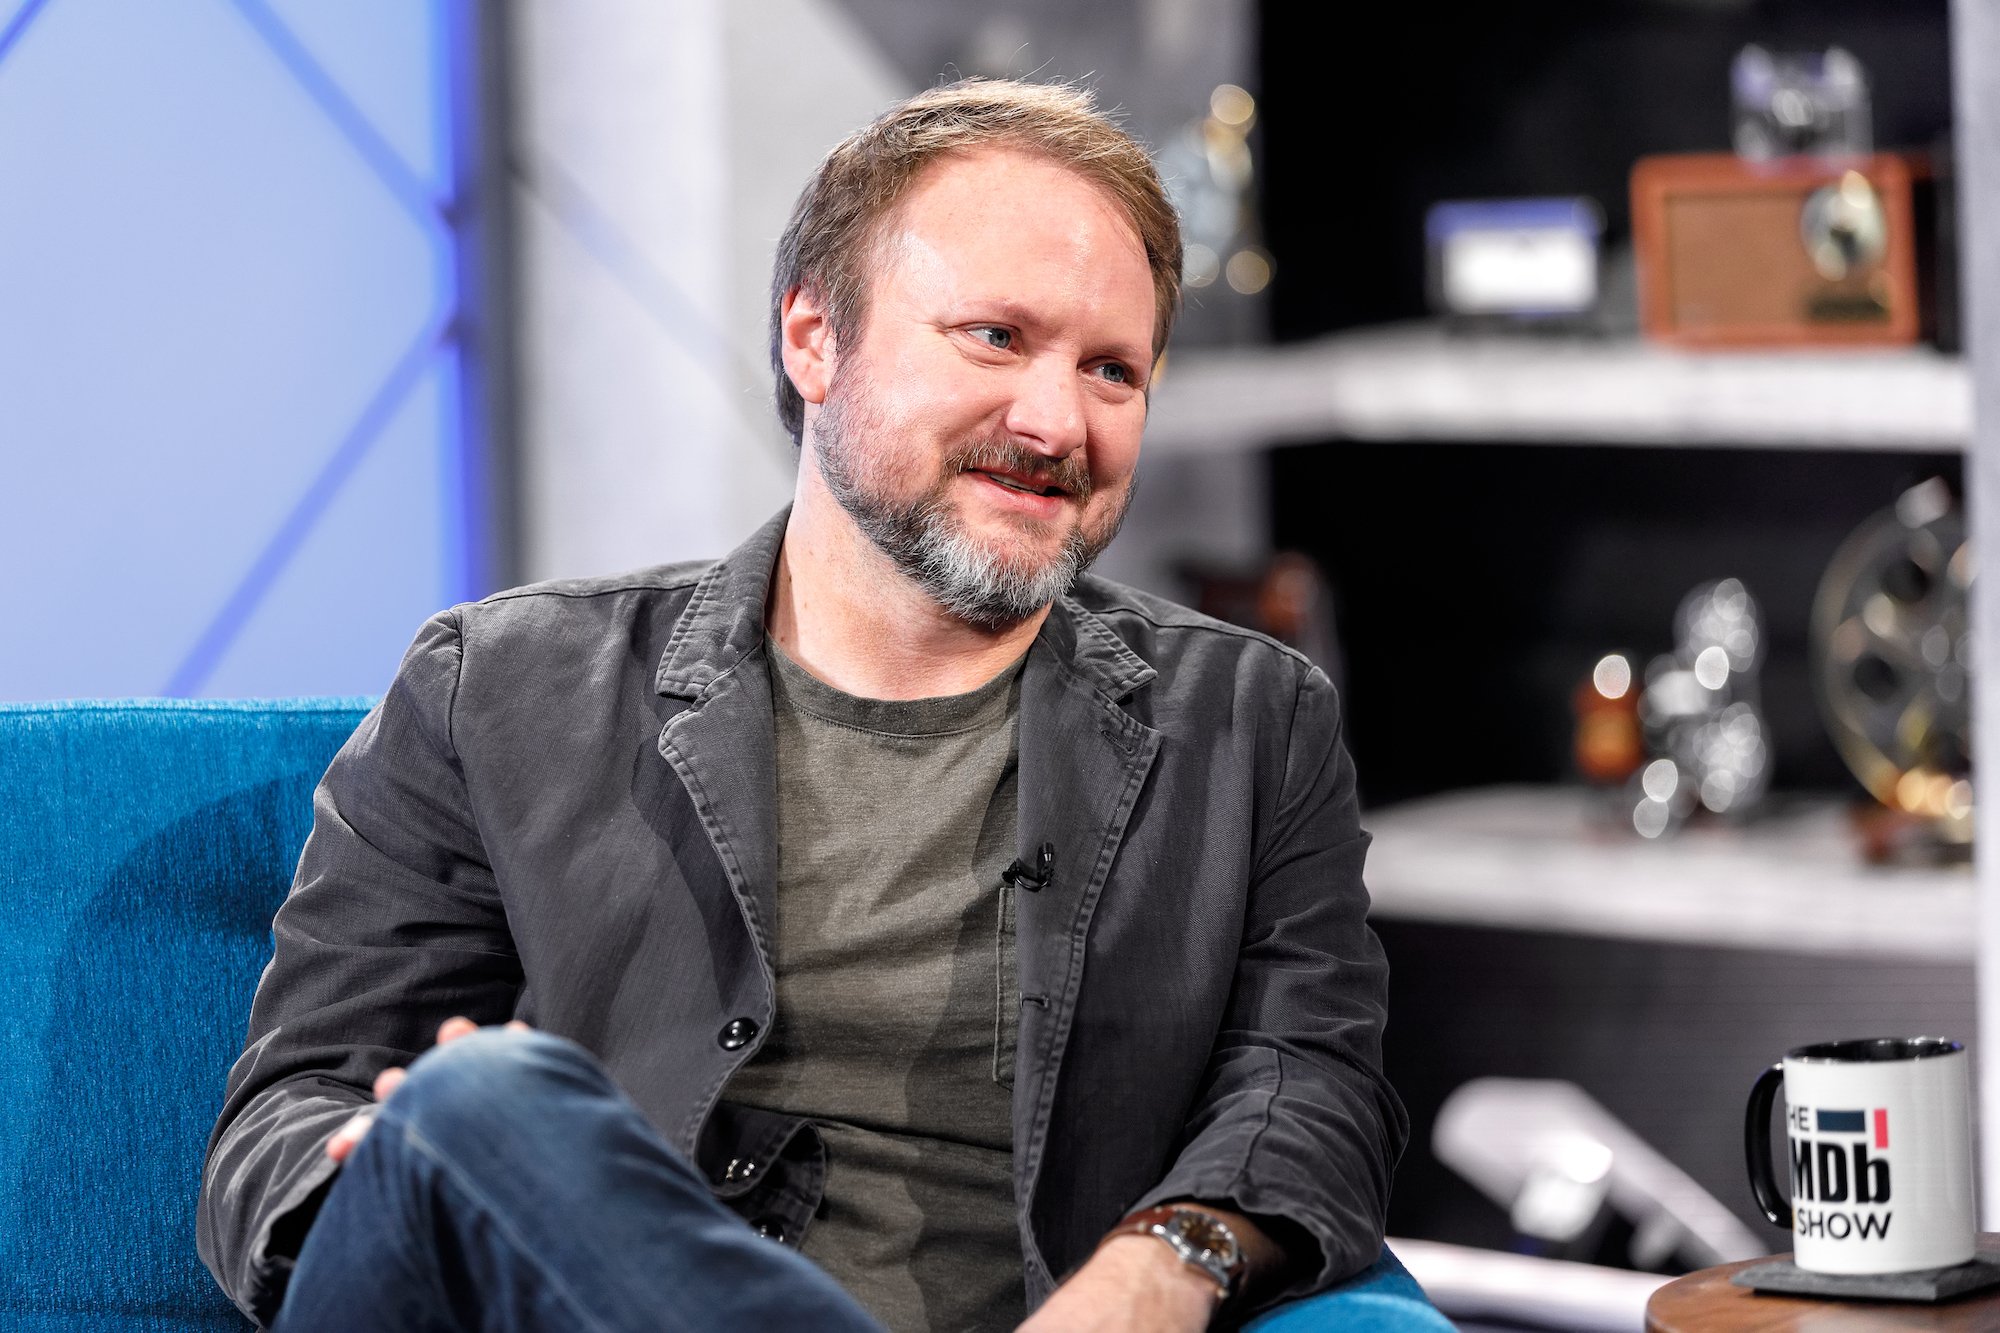 Rian Johnson Is Apparently Sticking With His Star Wars Trilogy - IGN Now